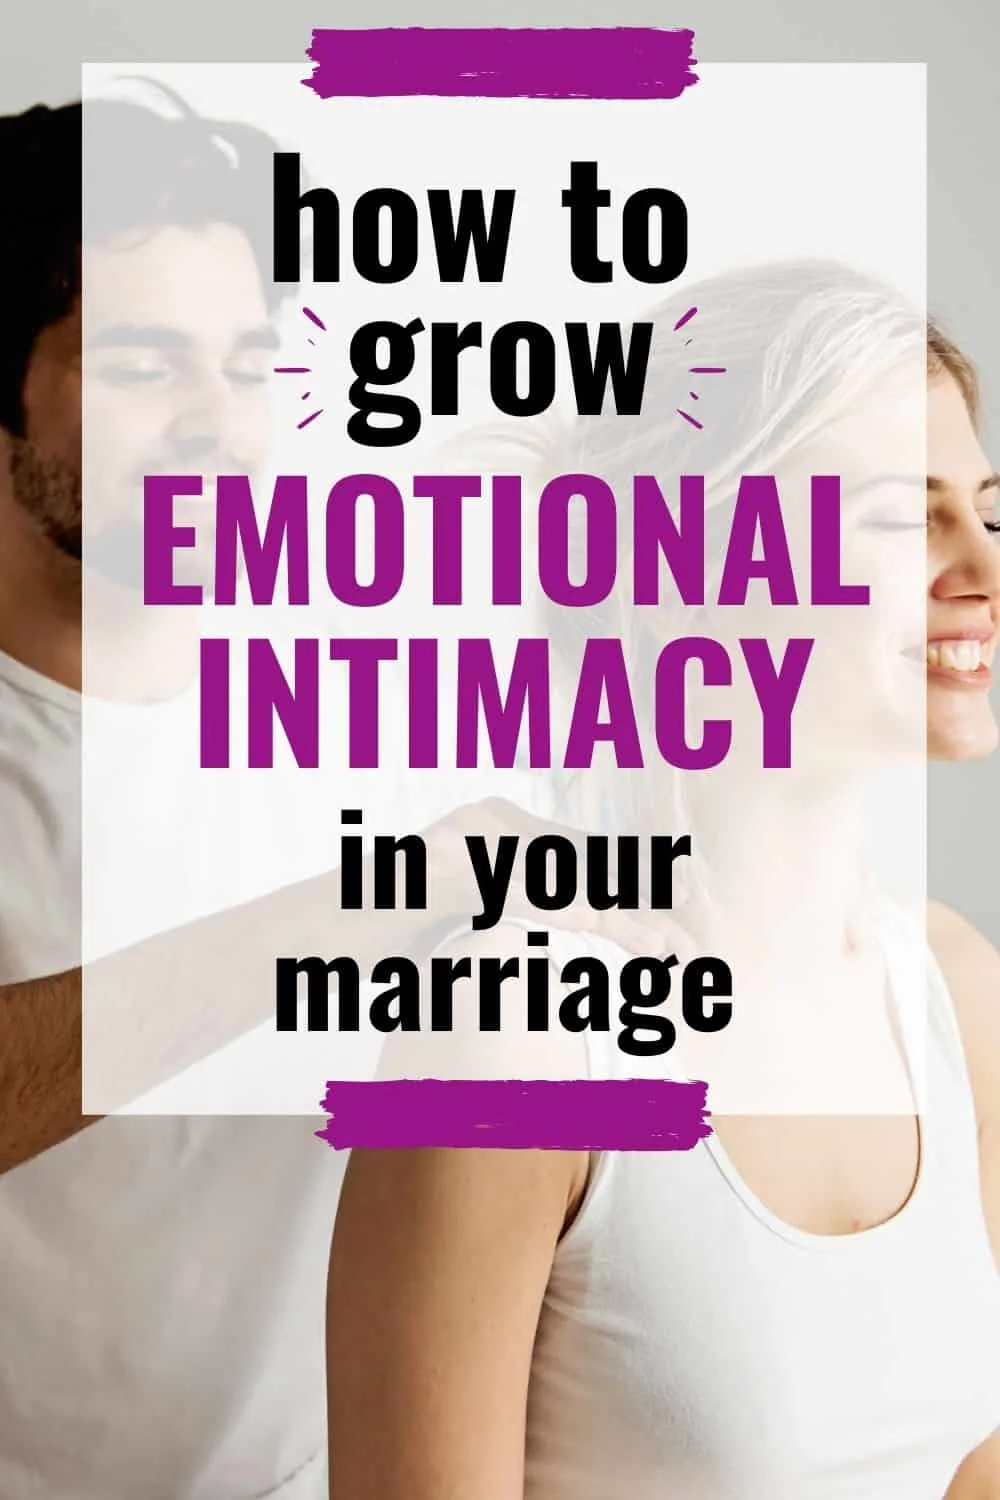 What is a marriage without intimacy